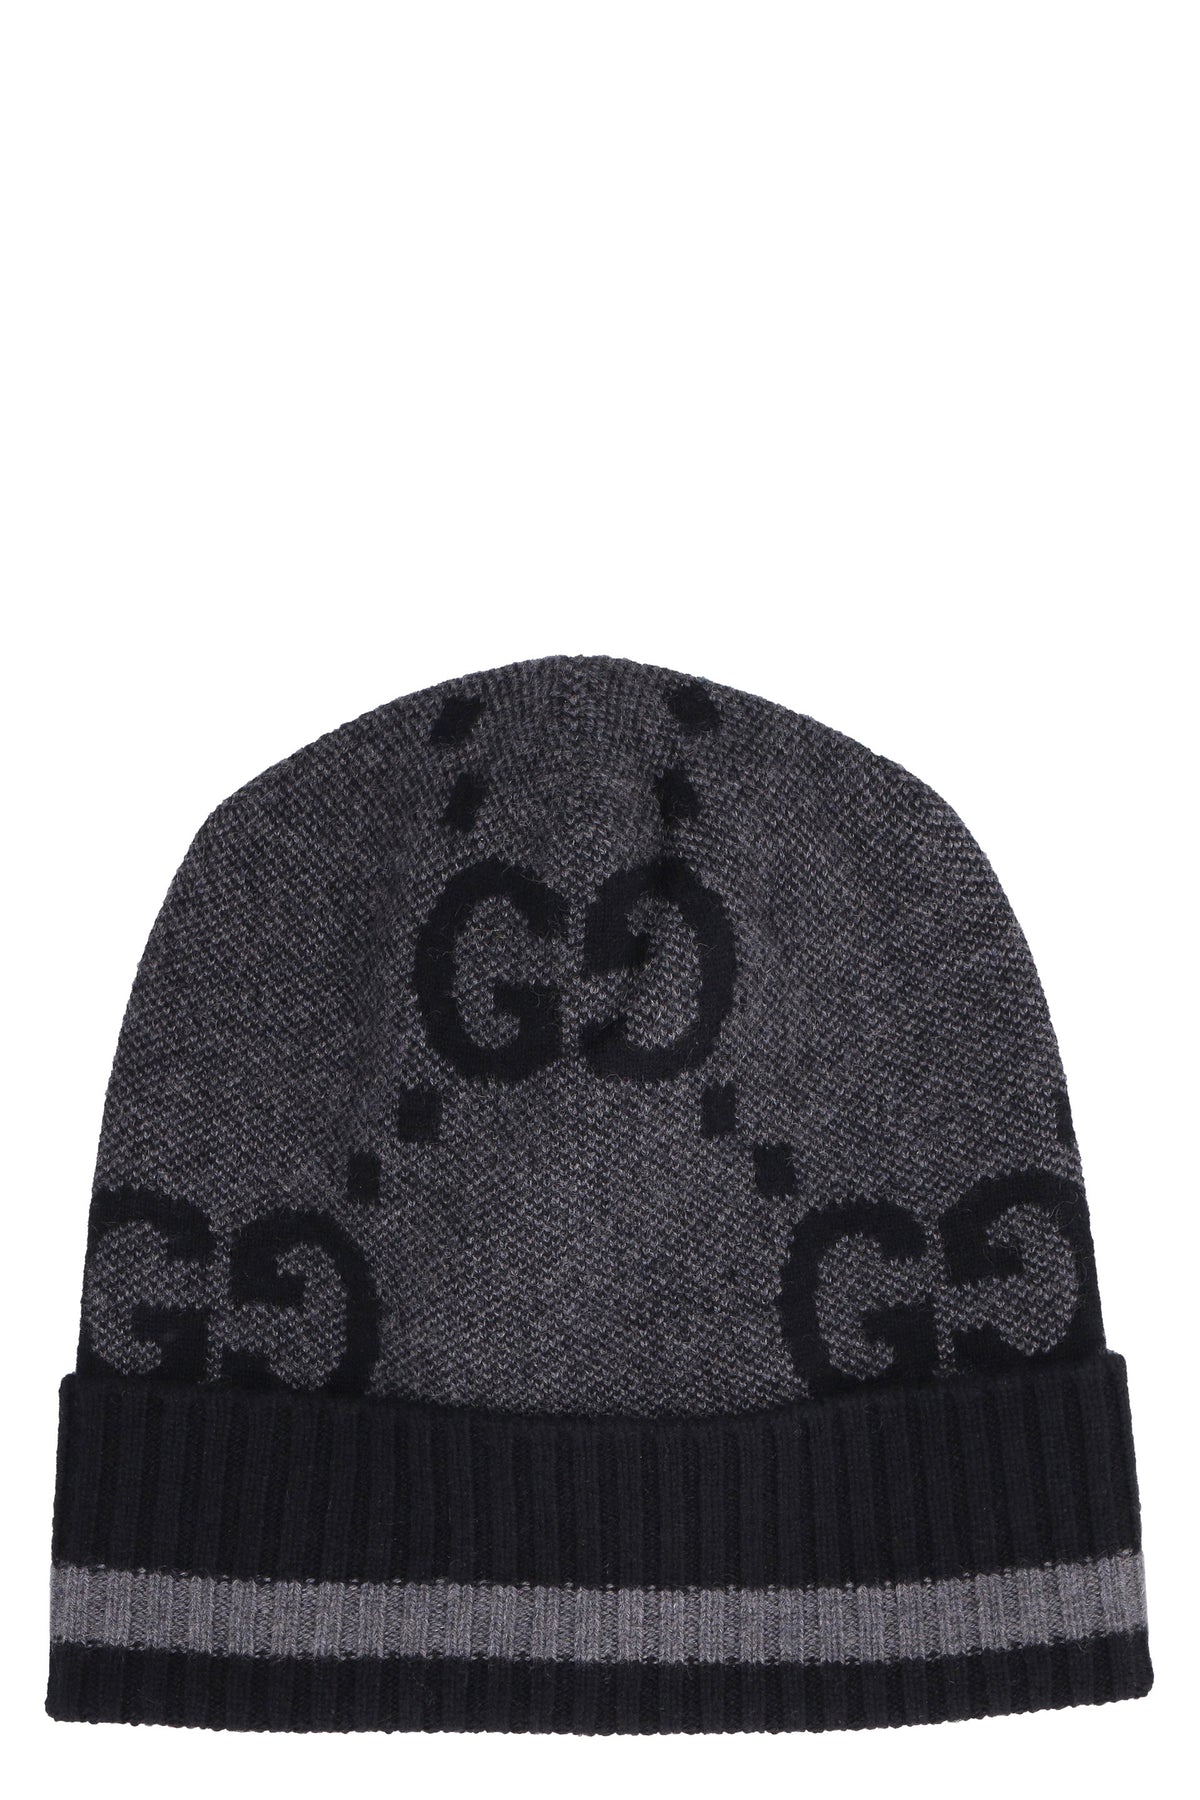 GG Cashmere Knit Beanie in Grey - Gucci